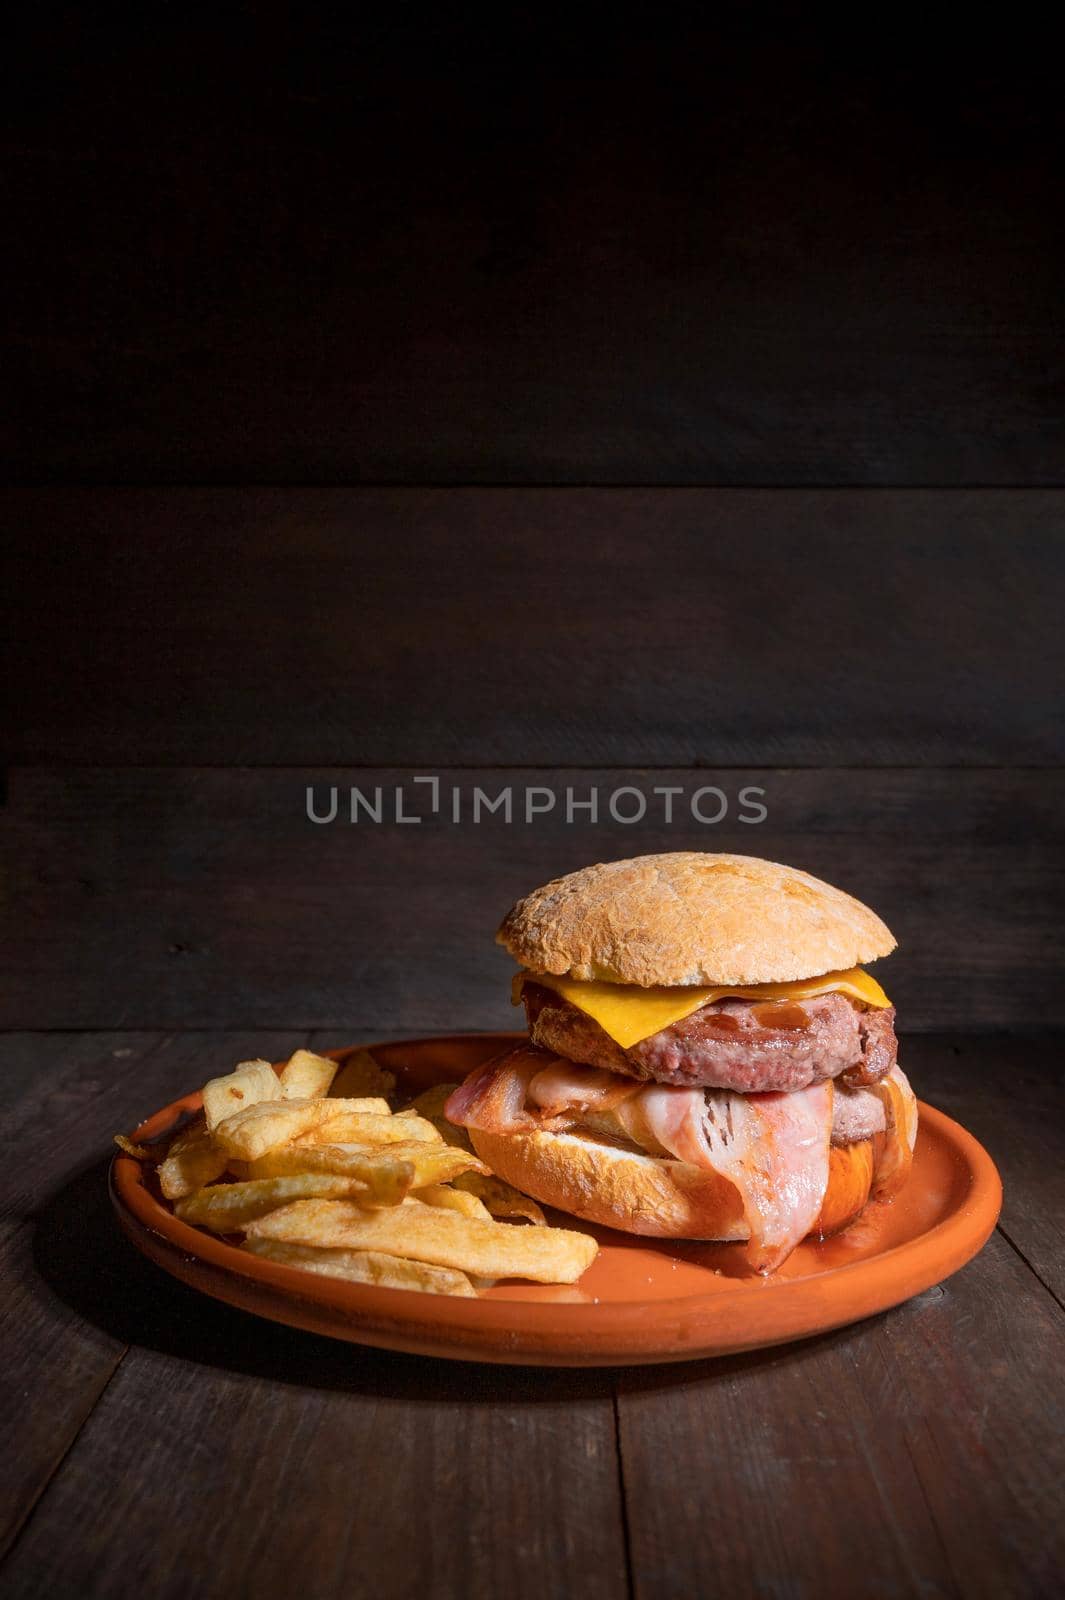 Premium grilled beef hamburger with bacon, cheese and French fries. Delicious American burger on wooden background. by HERRAEZ